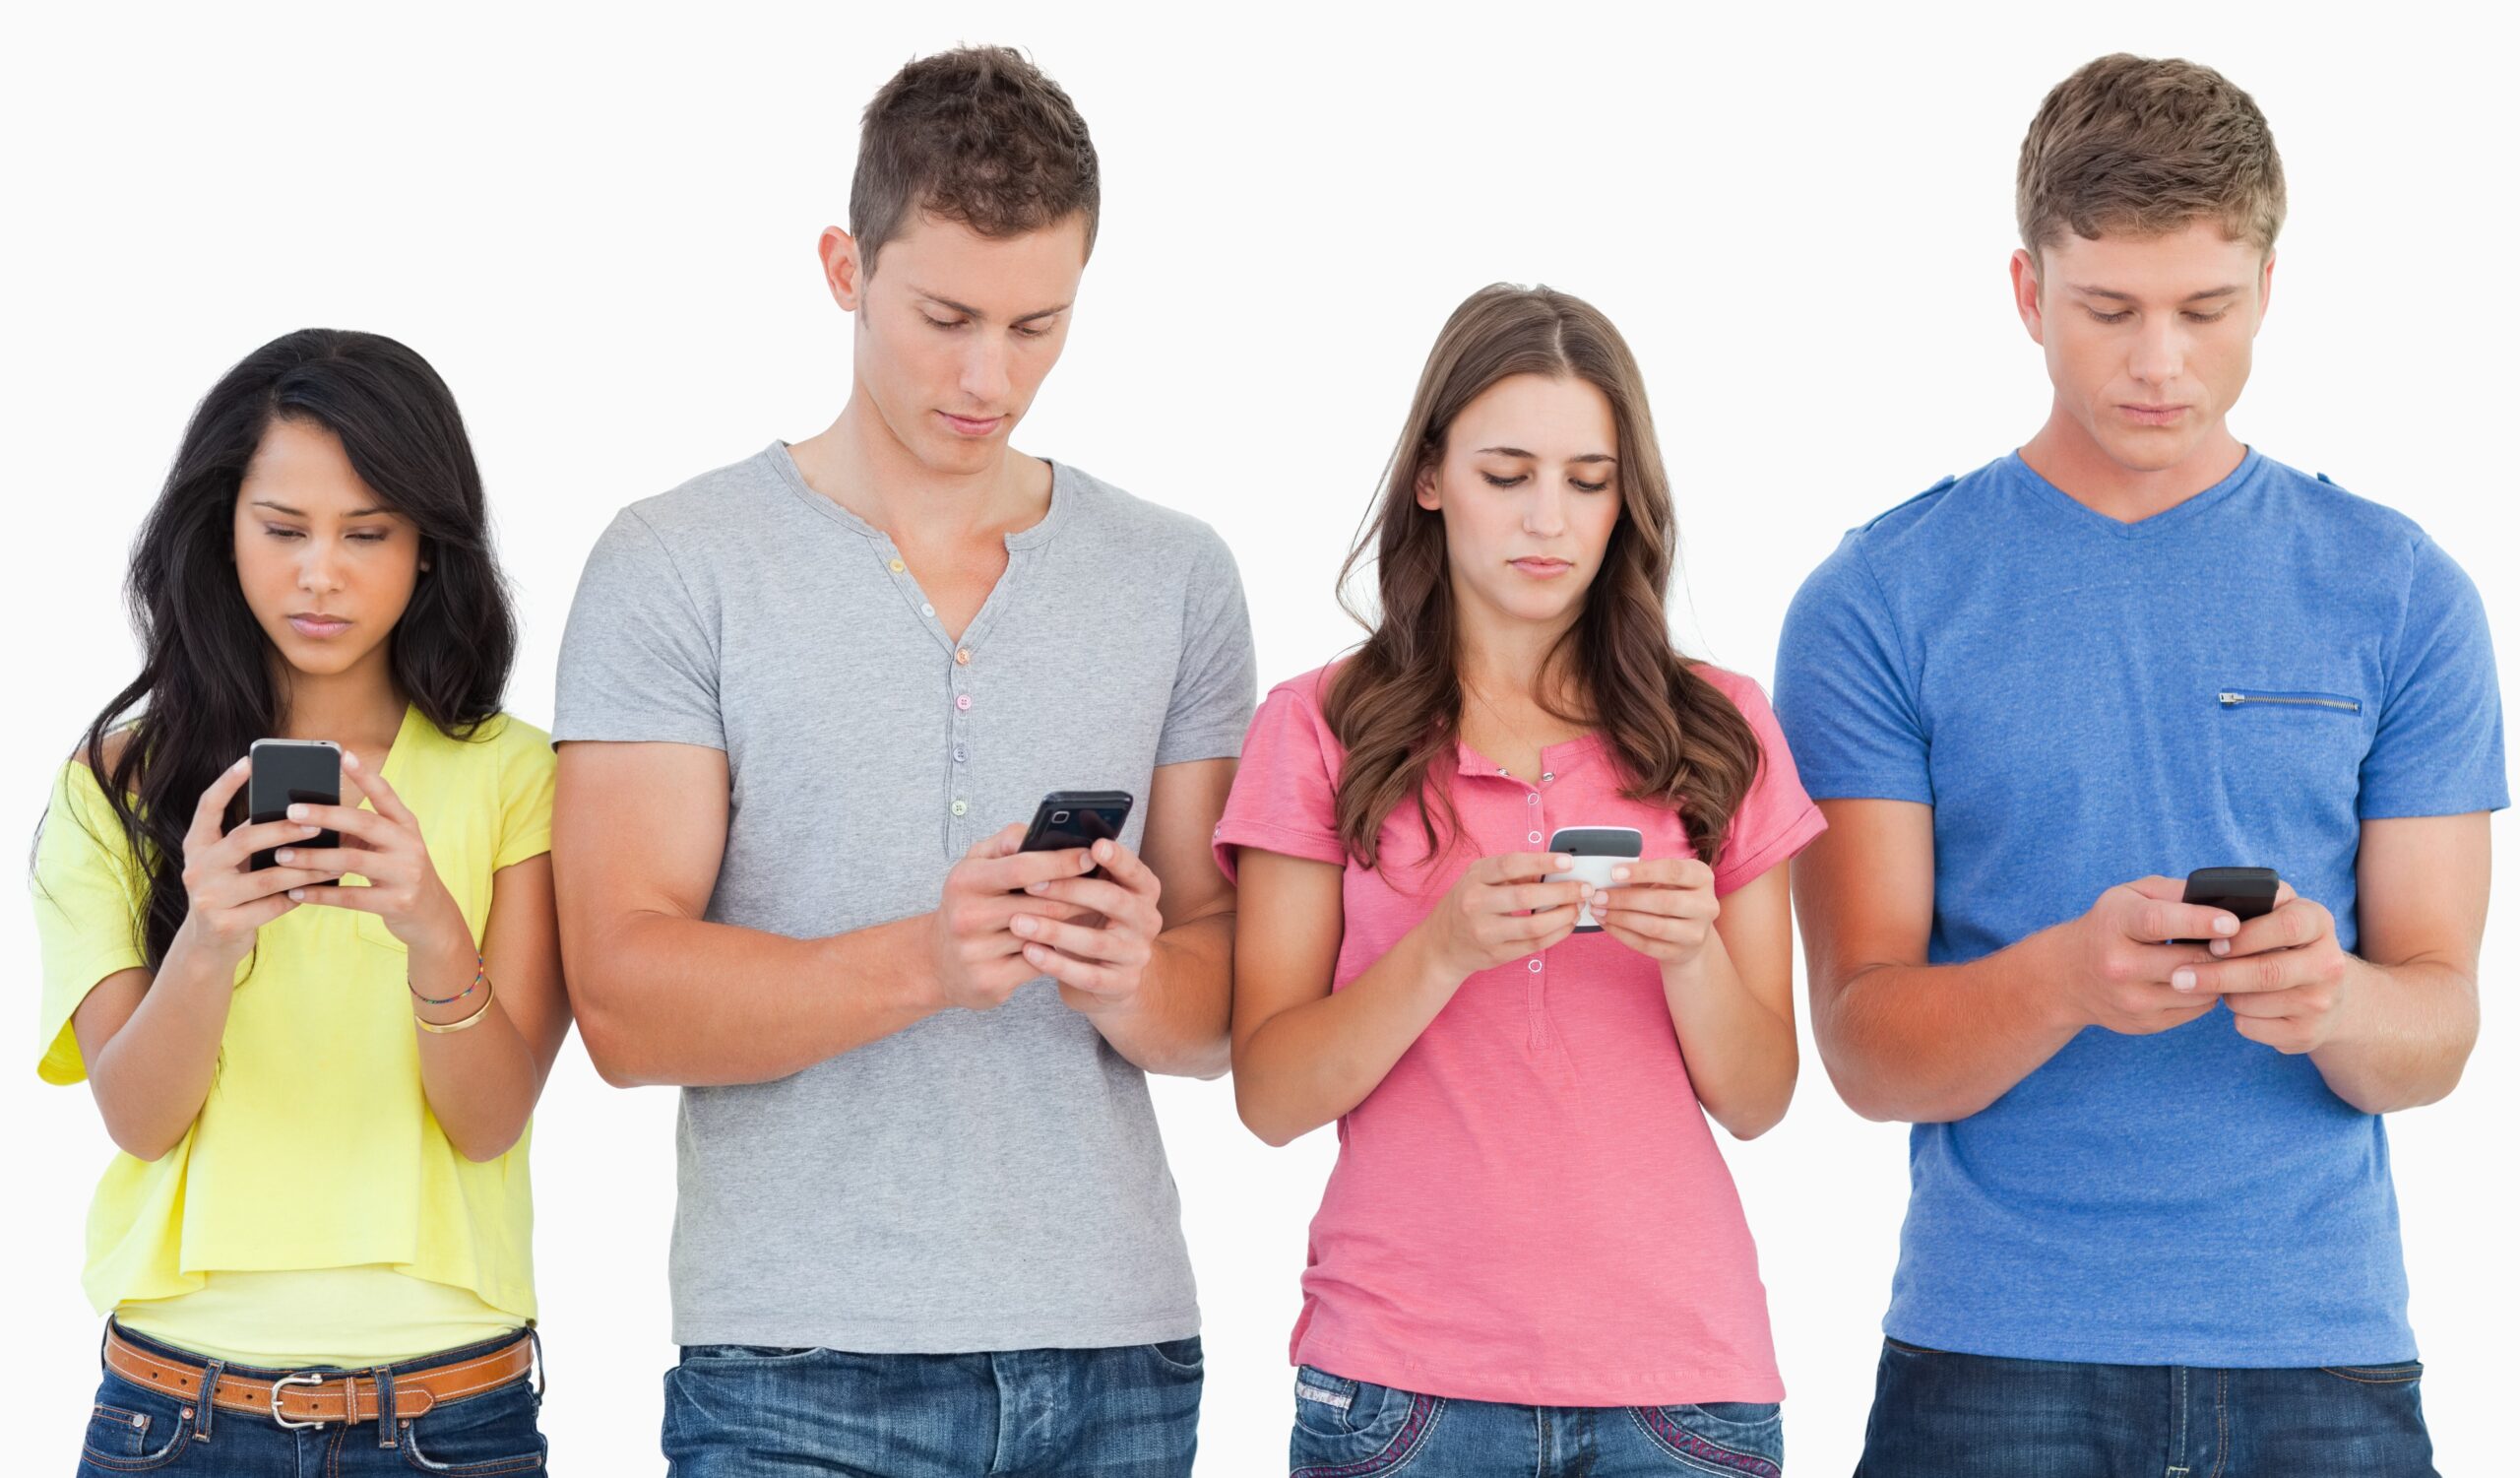 Israelis search, use social networks and watch videos on their smartphones more than any other population. (Shutterstock)